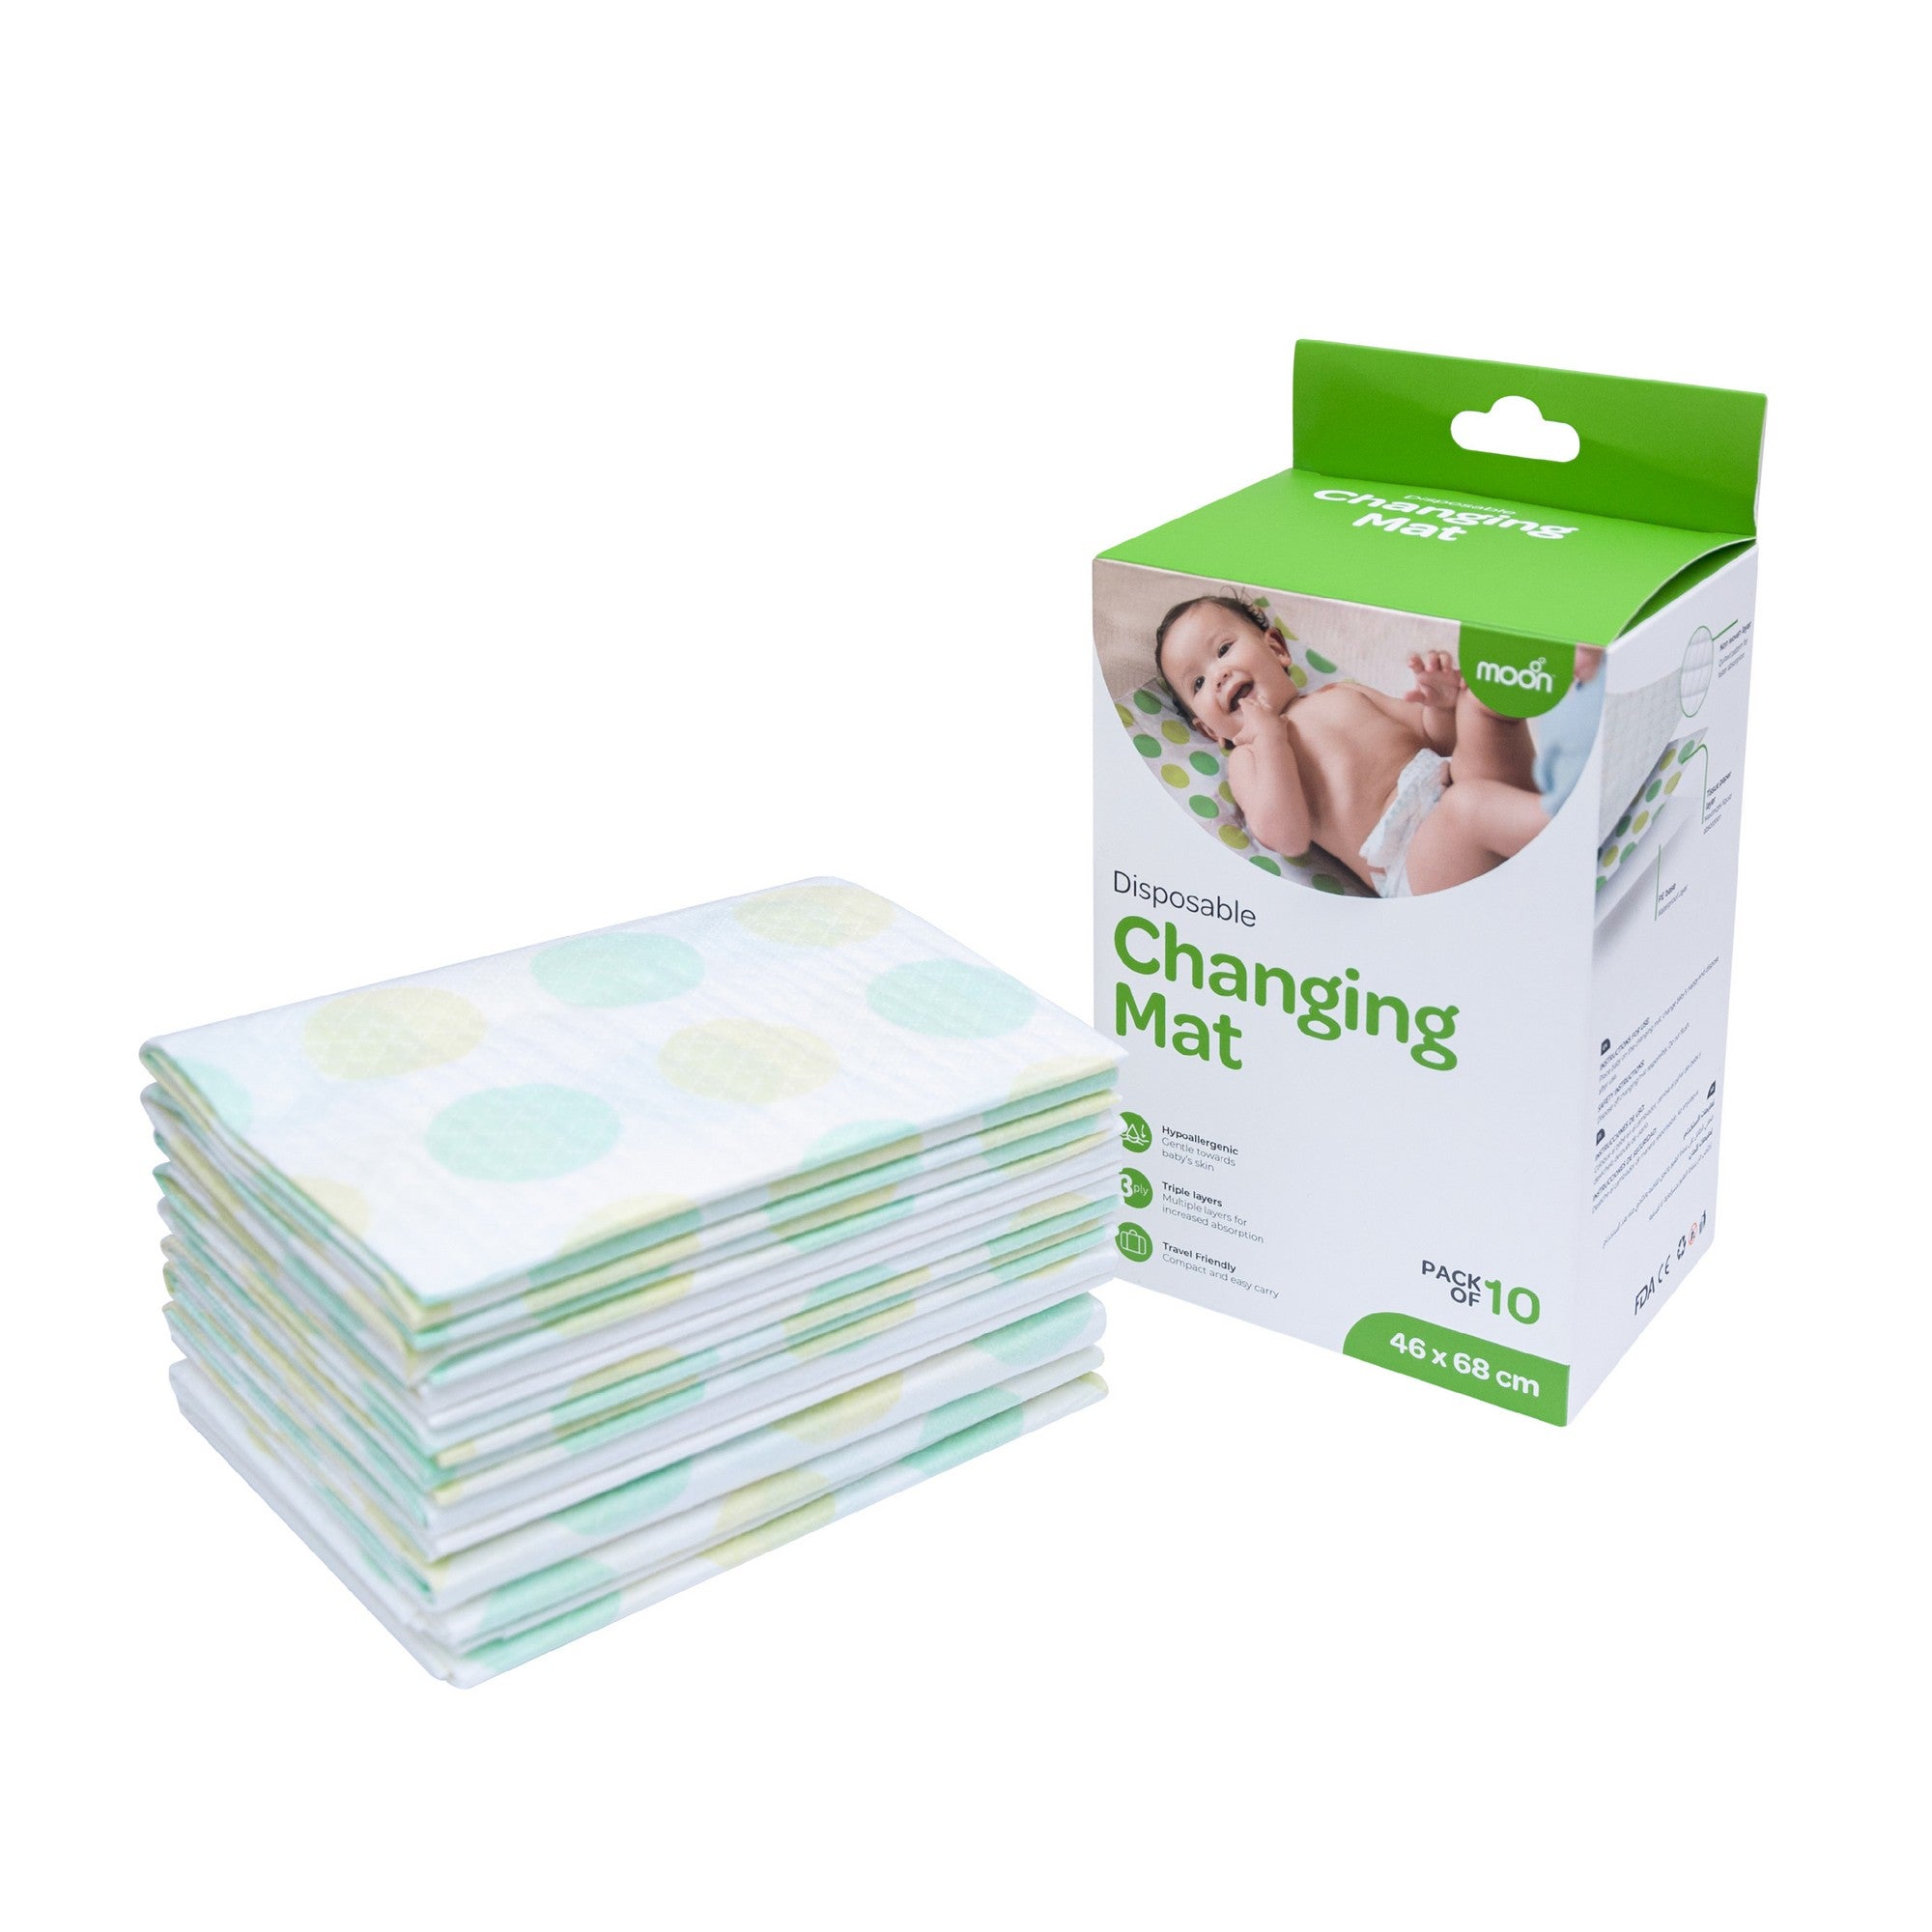 Moon Disposable change mat Diaper Changing Kits Multicolor Birth to 12 Months